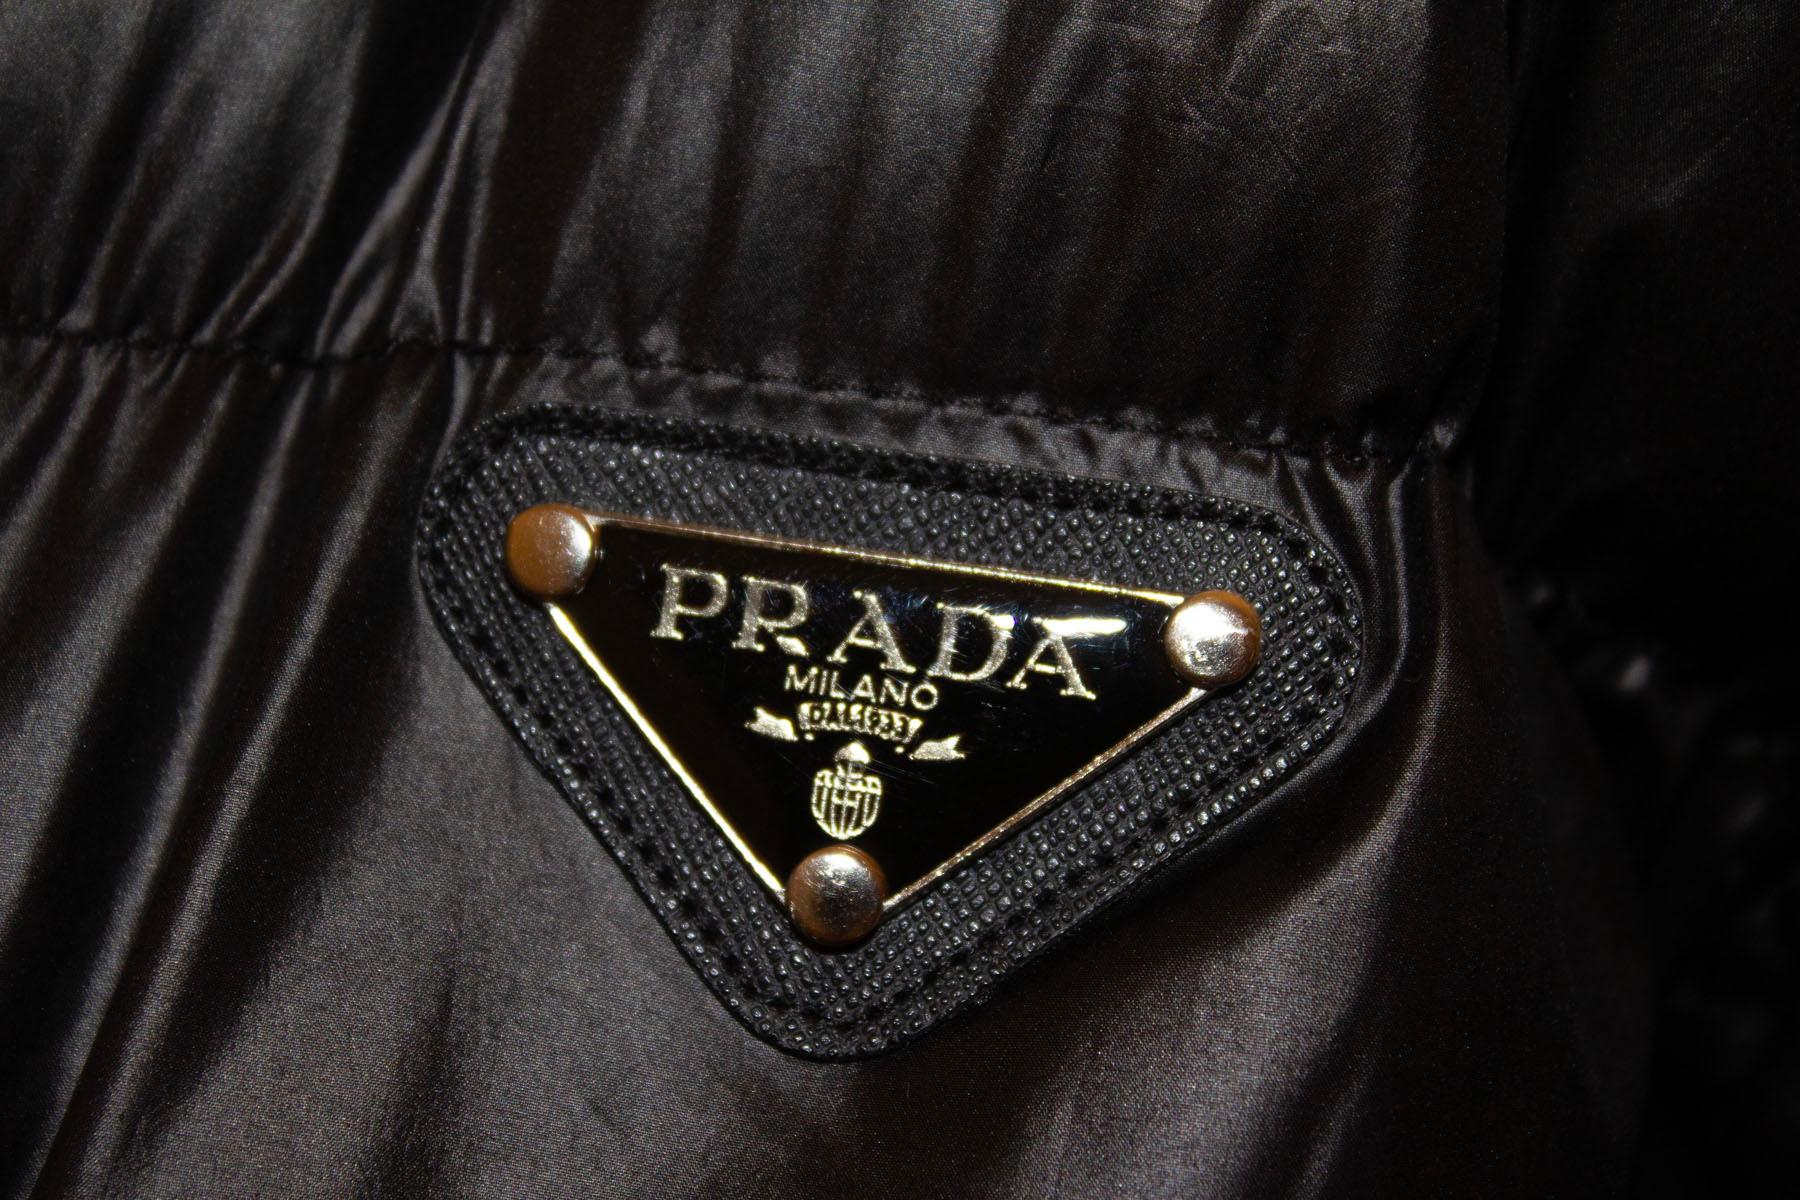 A great black Prada puffa jacket , perfect for Fall /Winter. The jacket is is in excellent condition and has the advantage of having detachable sleaves , and so can be worn as a gilet or jacket. 
The jacket has a central zip opening, and two zip